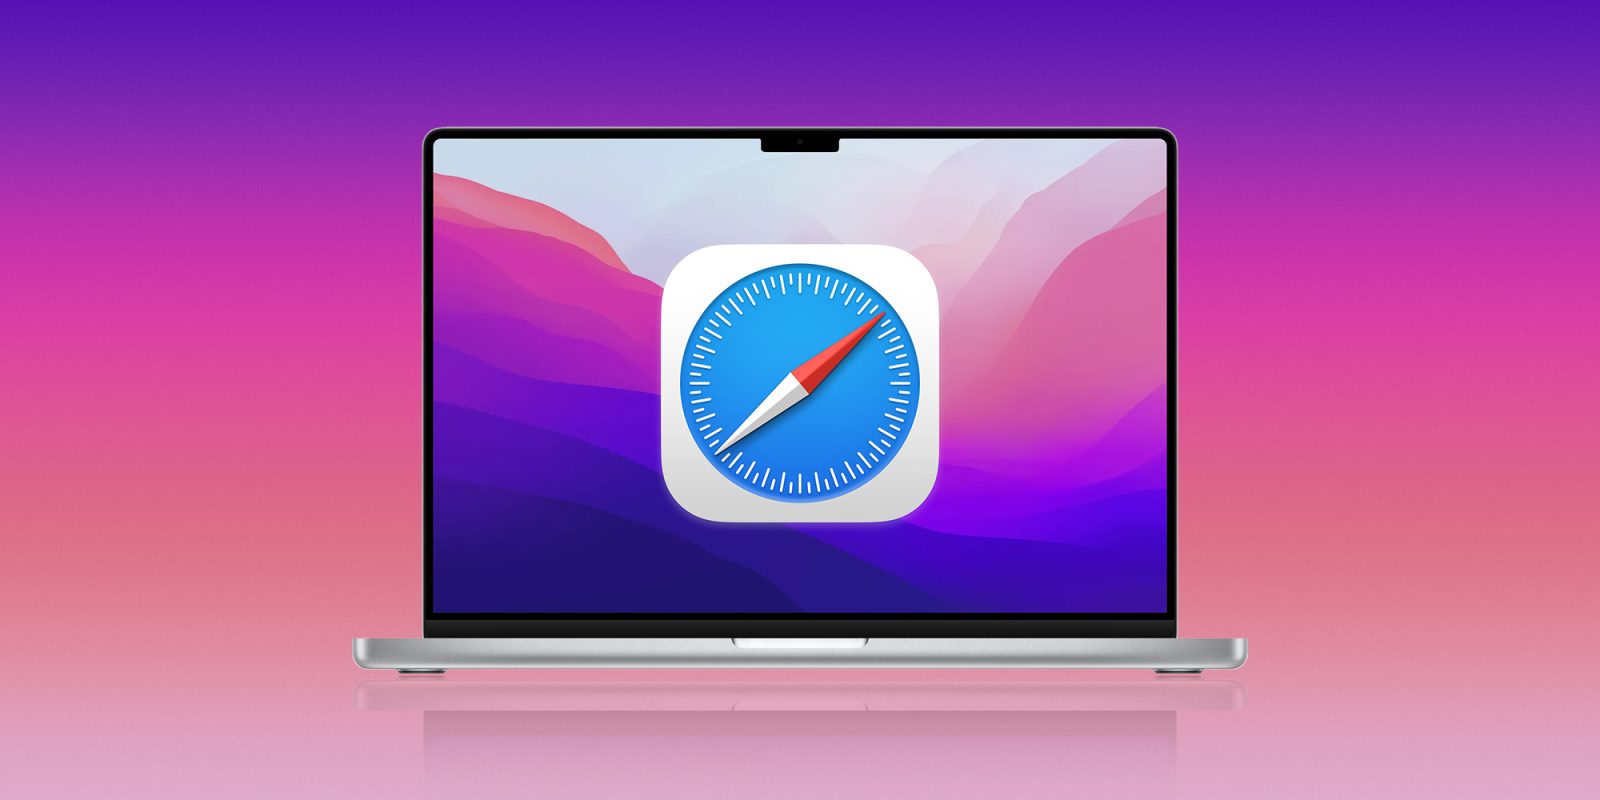 Apple releases macOS 12.2 with Safari security patch, improved ProMotion scrolling